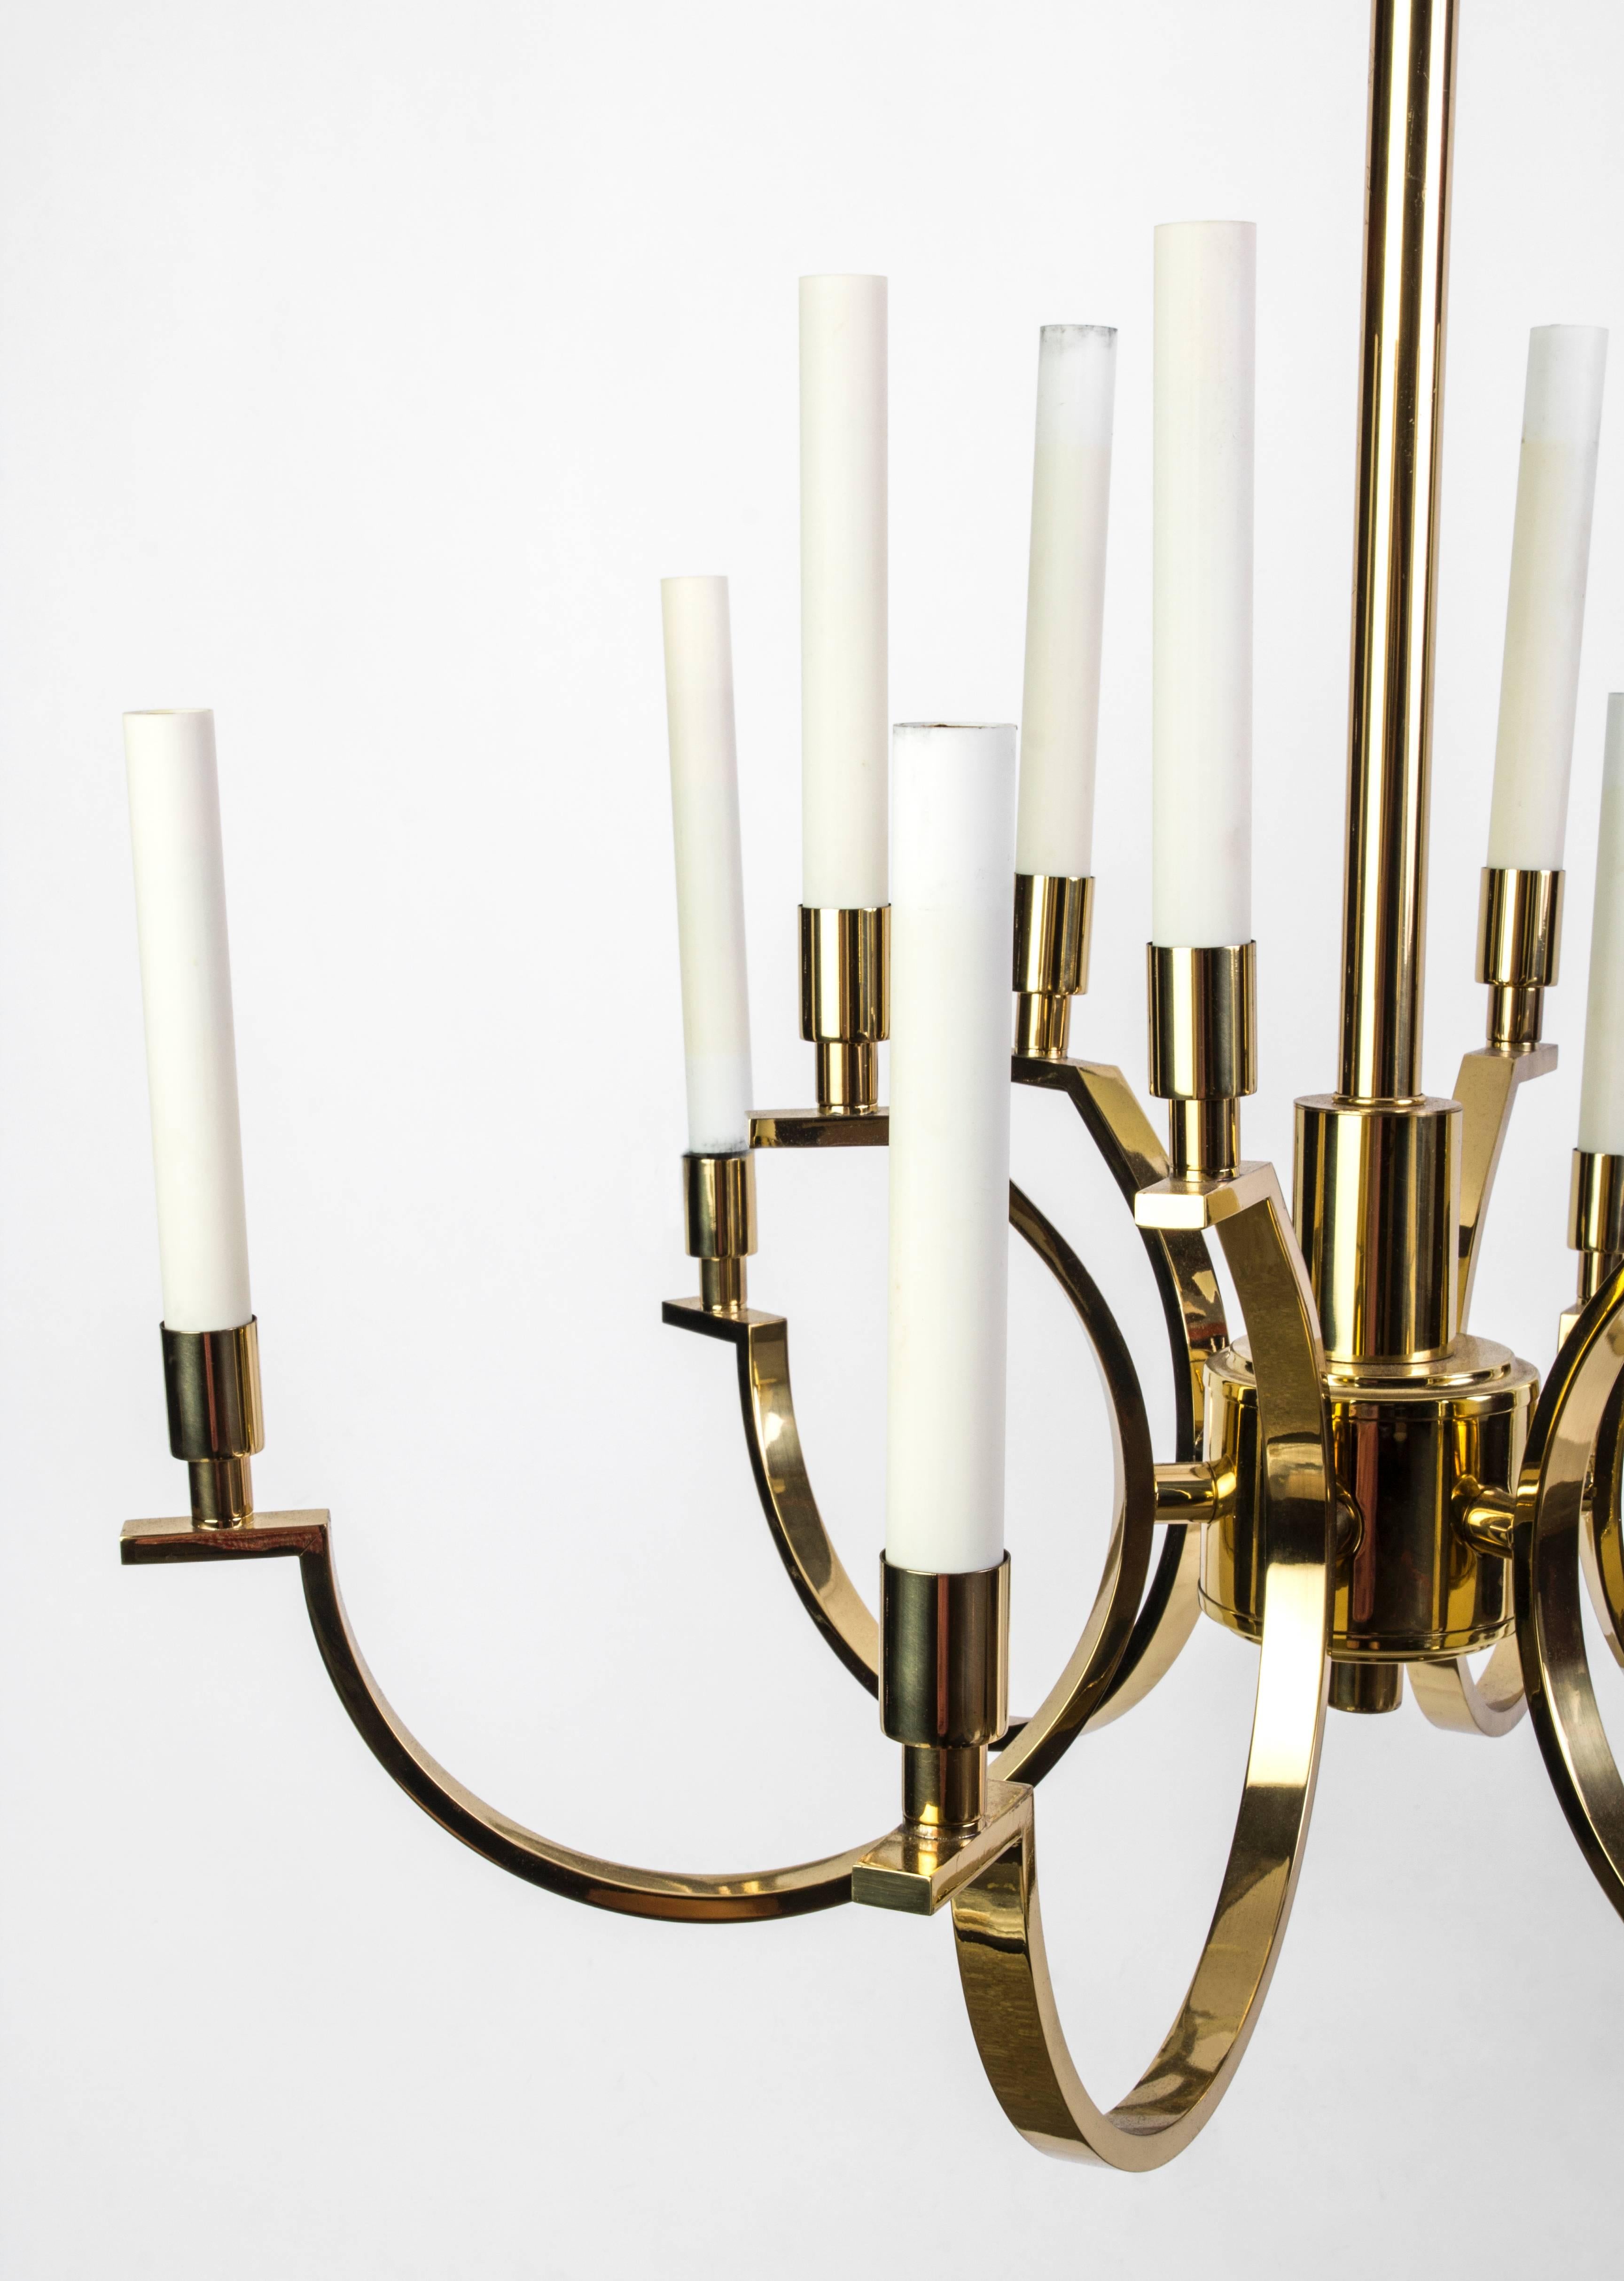 This exquisite Mid-Century Modernist chandelier was designed by Frederick Cooper. It features a two-tier brass frame candelabra form design with elongated candlestick lights. It is in excellent condition.
 